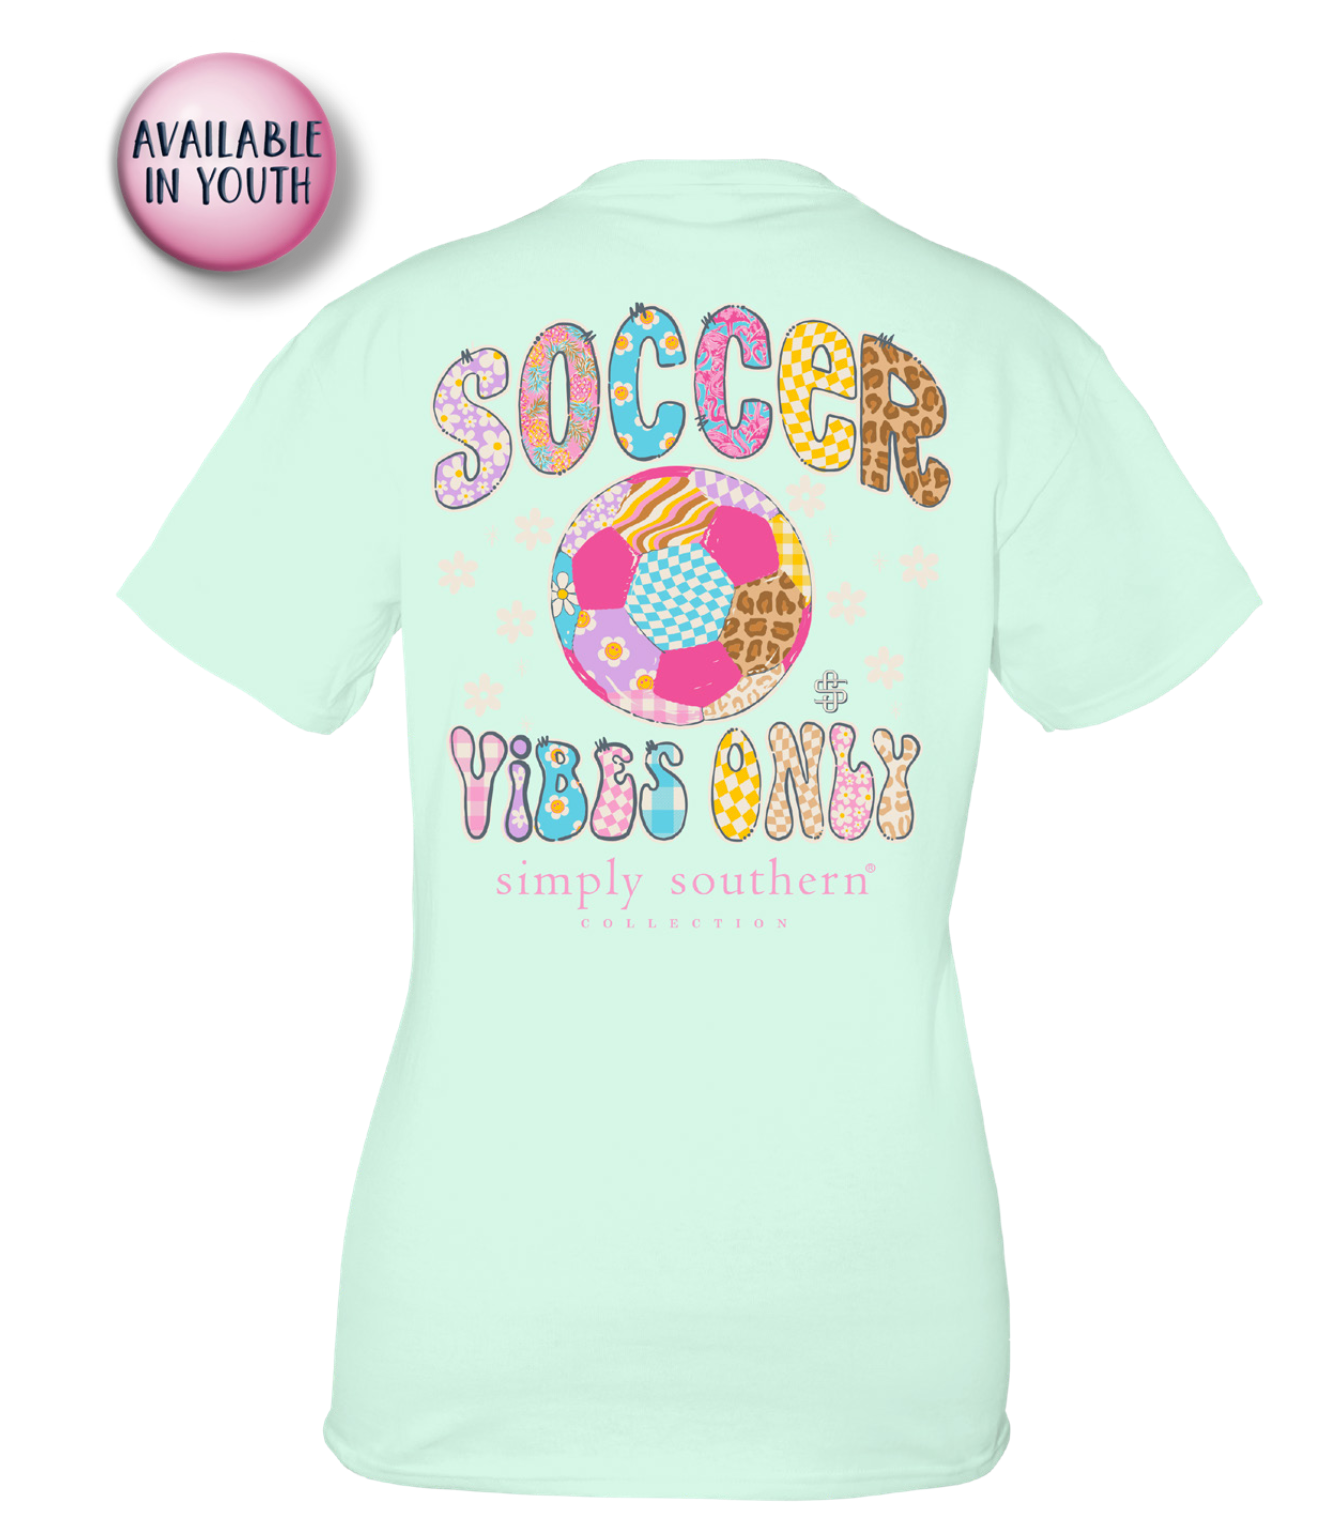 'Soccer Vibes Only' Short Sleeve Tee by Simply Southern